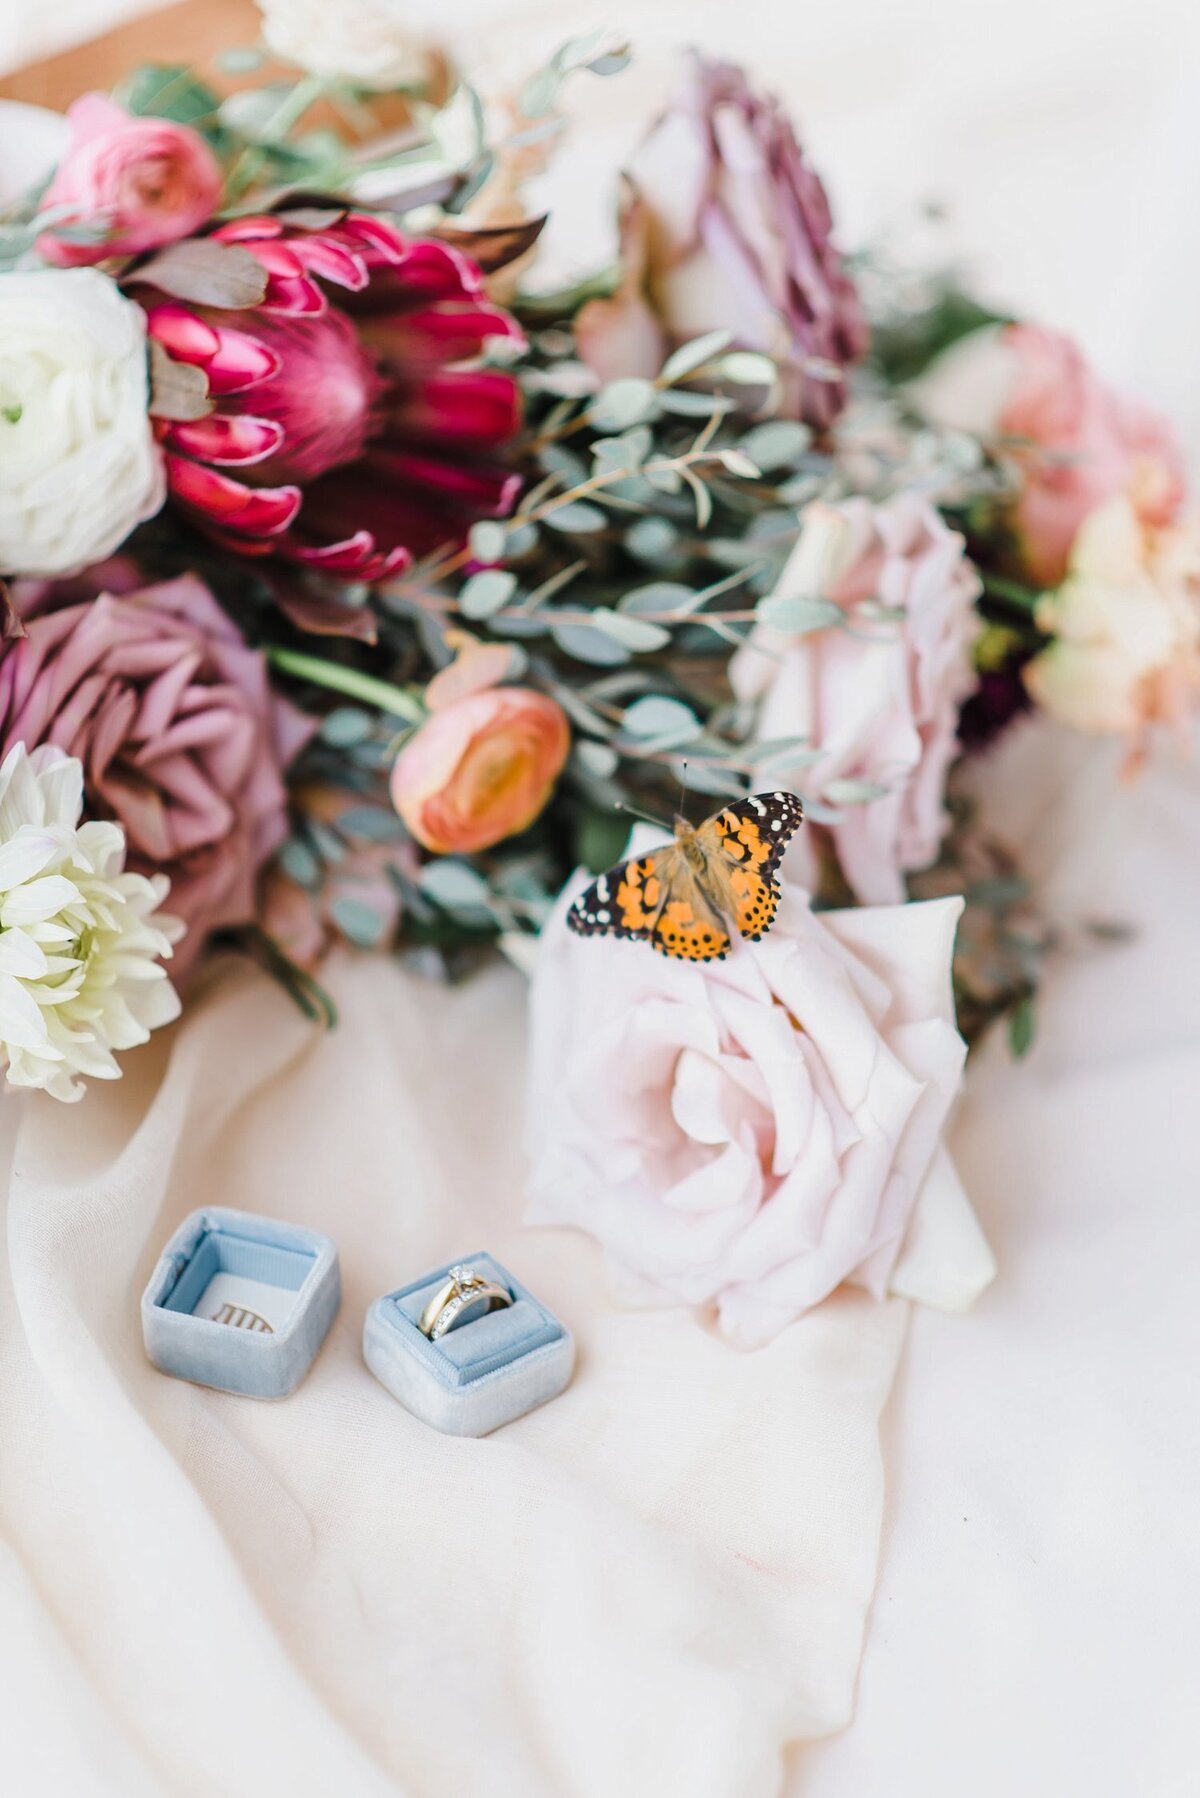 A live monarch butterfly  sits on a rose from a bouquet laying sideways on soft material with a dusty blue ring box and diamond ring laying beside it at a wedding  in Ottawa Ontario